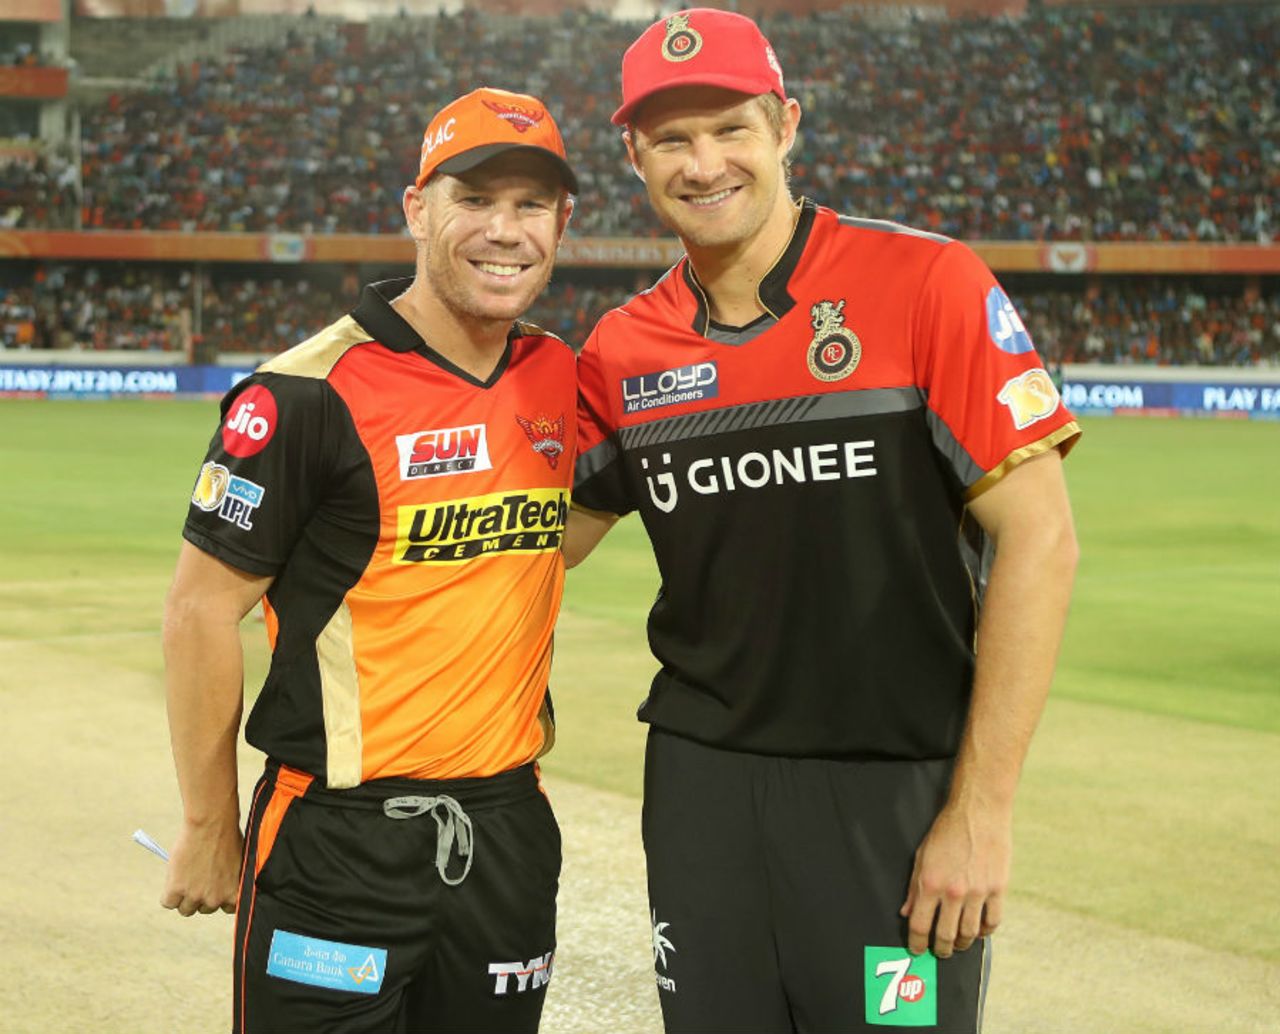 David Warner and Shane Watson all smiles before the toss, Sunrisers Hyderabad v Royal Challengers Bangalore, IPL, Hyderabad, April 5, 2017